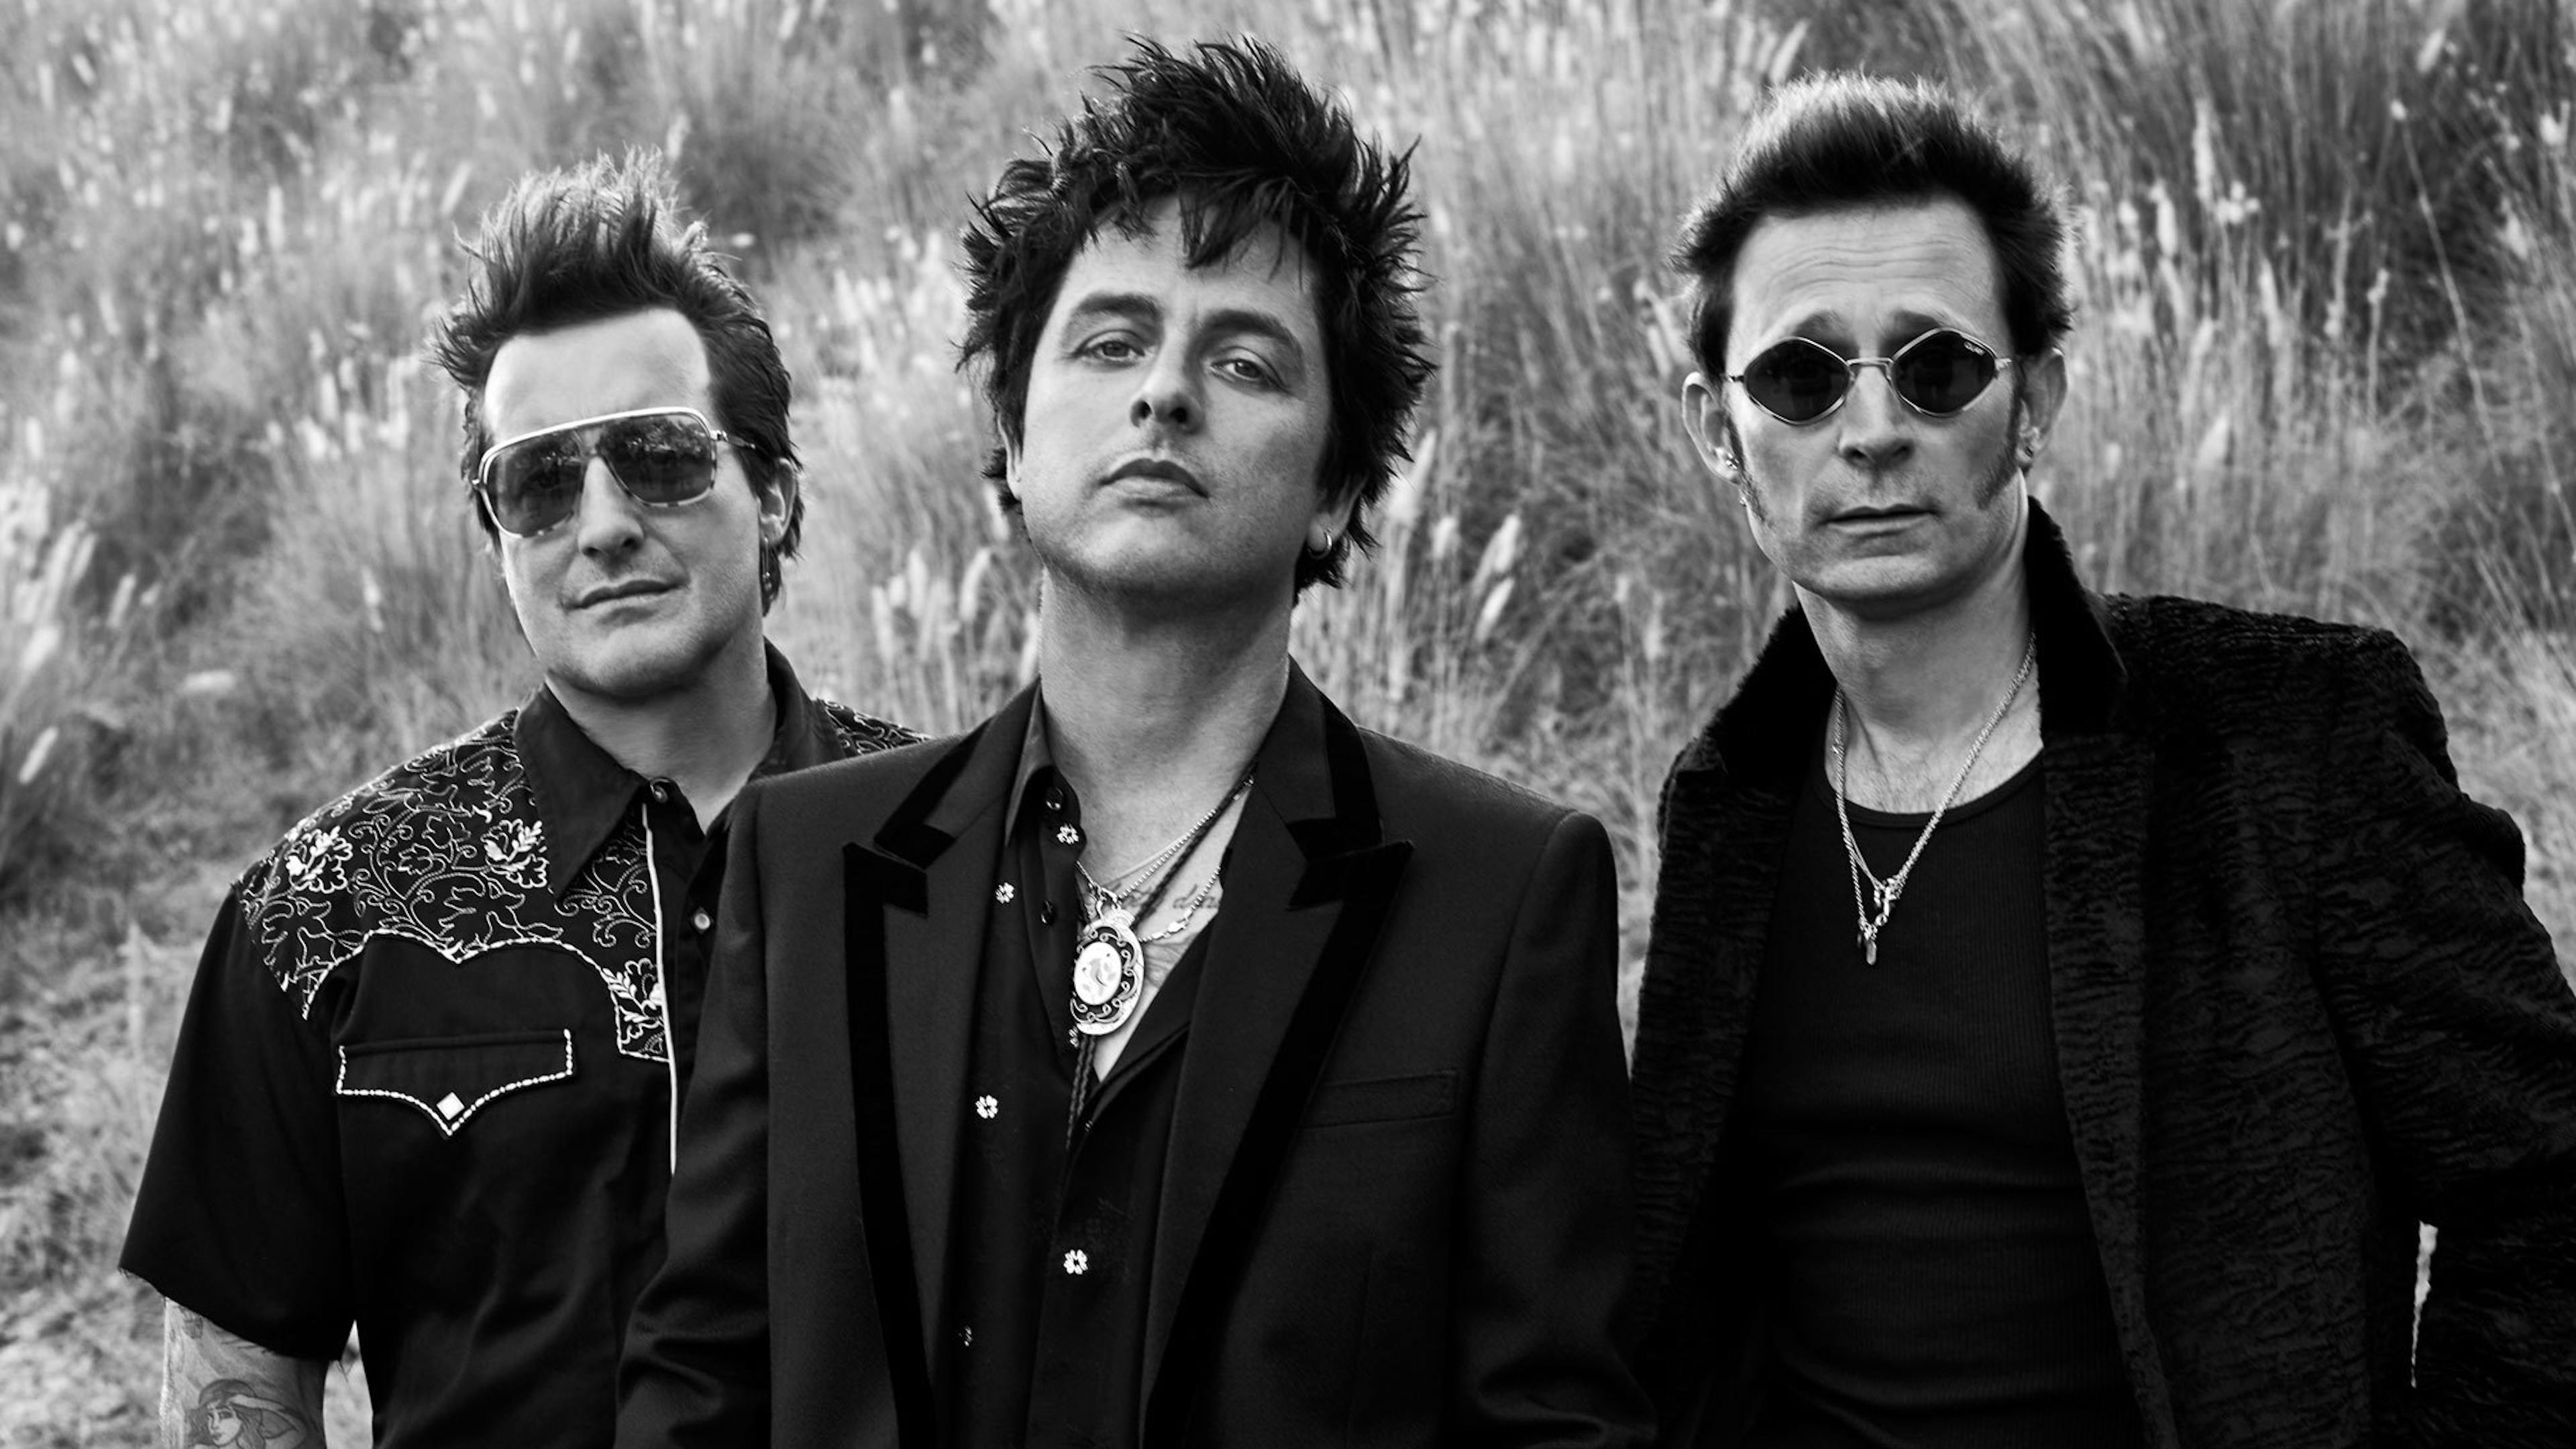 Green Day's Billie Joe Armstrong To Perform Living Room Concert For Charity